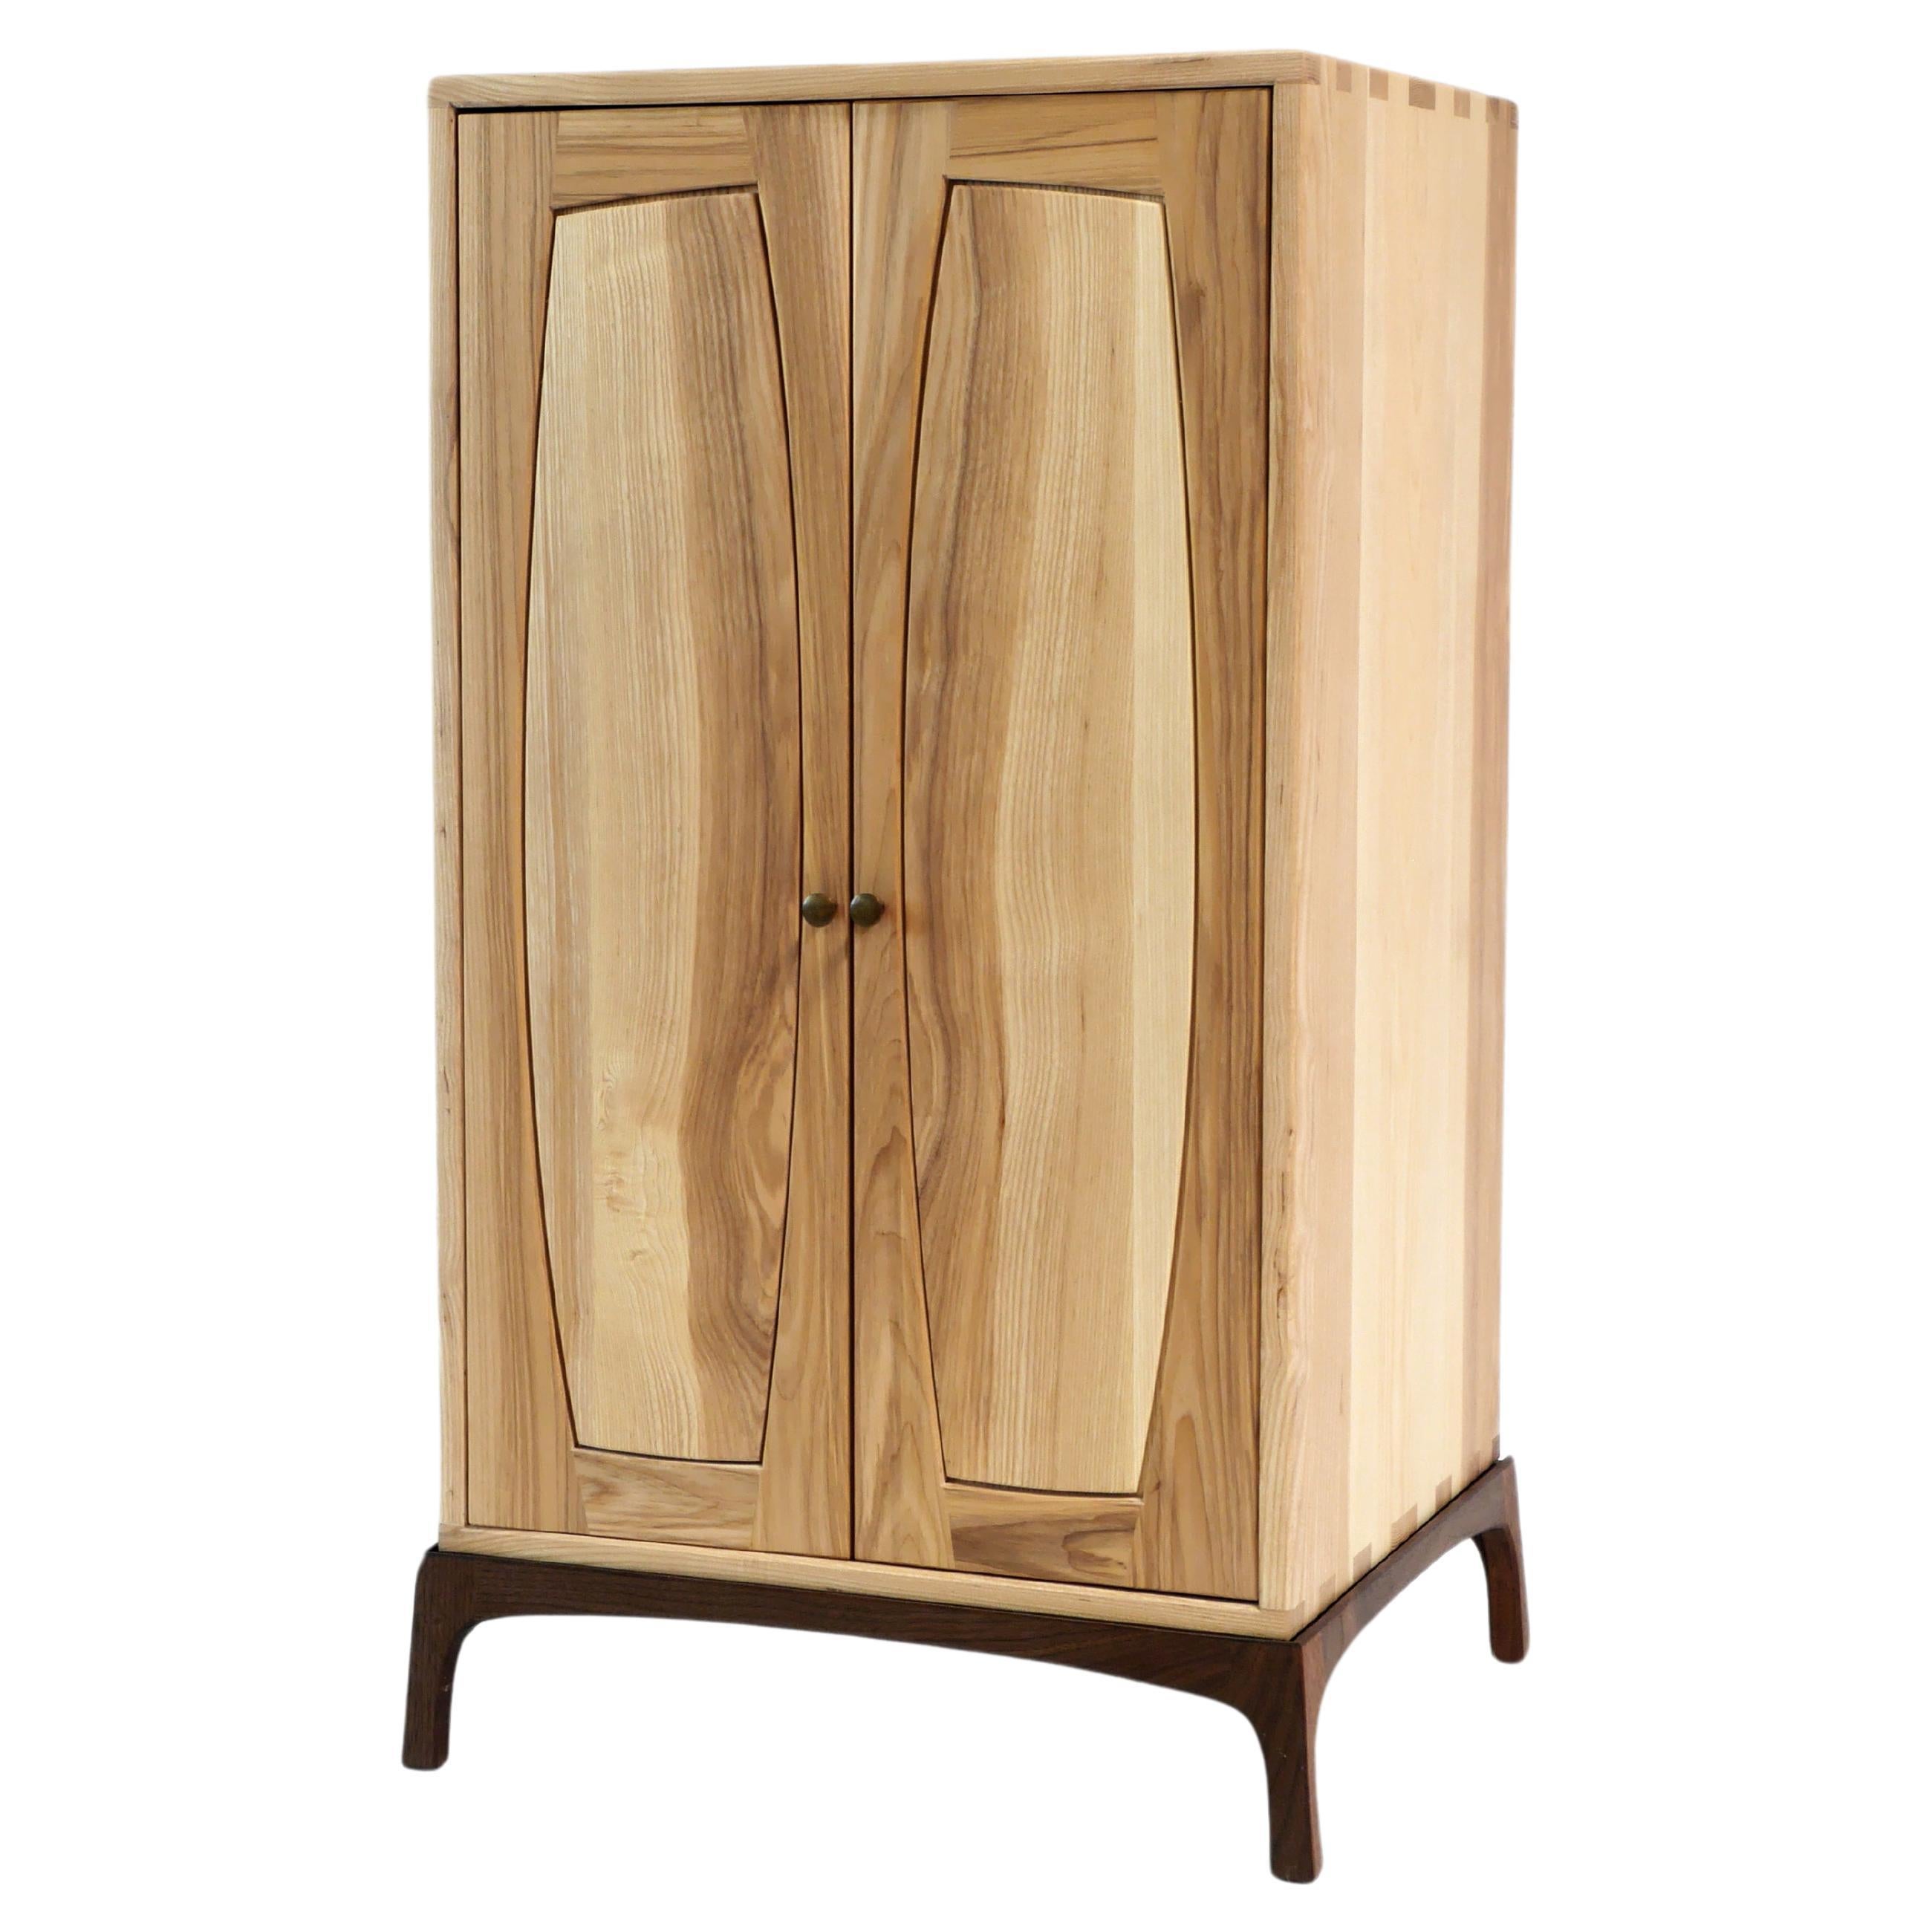 Ash Vespers Side Cabinet, Two Door Cabinet with Adjustable Shelf by Arid For Sale